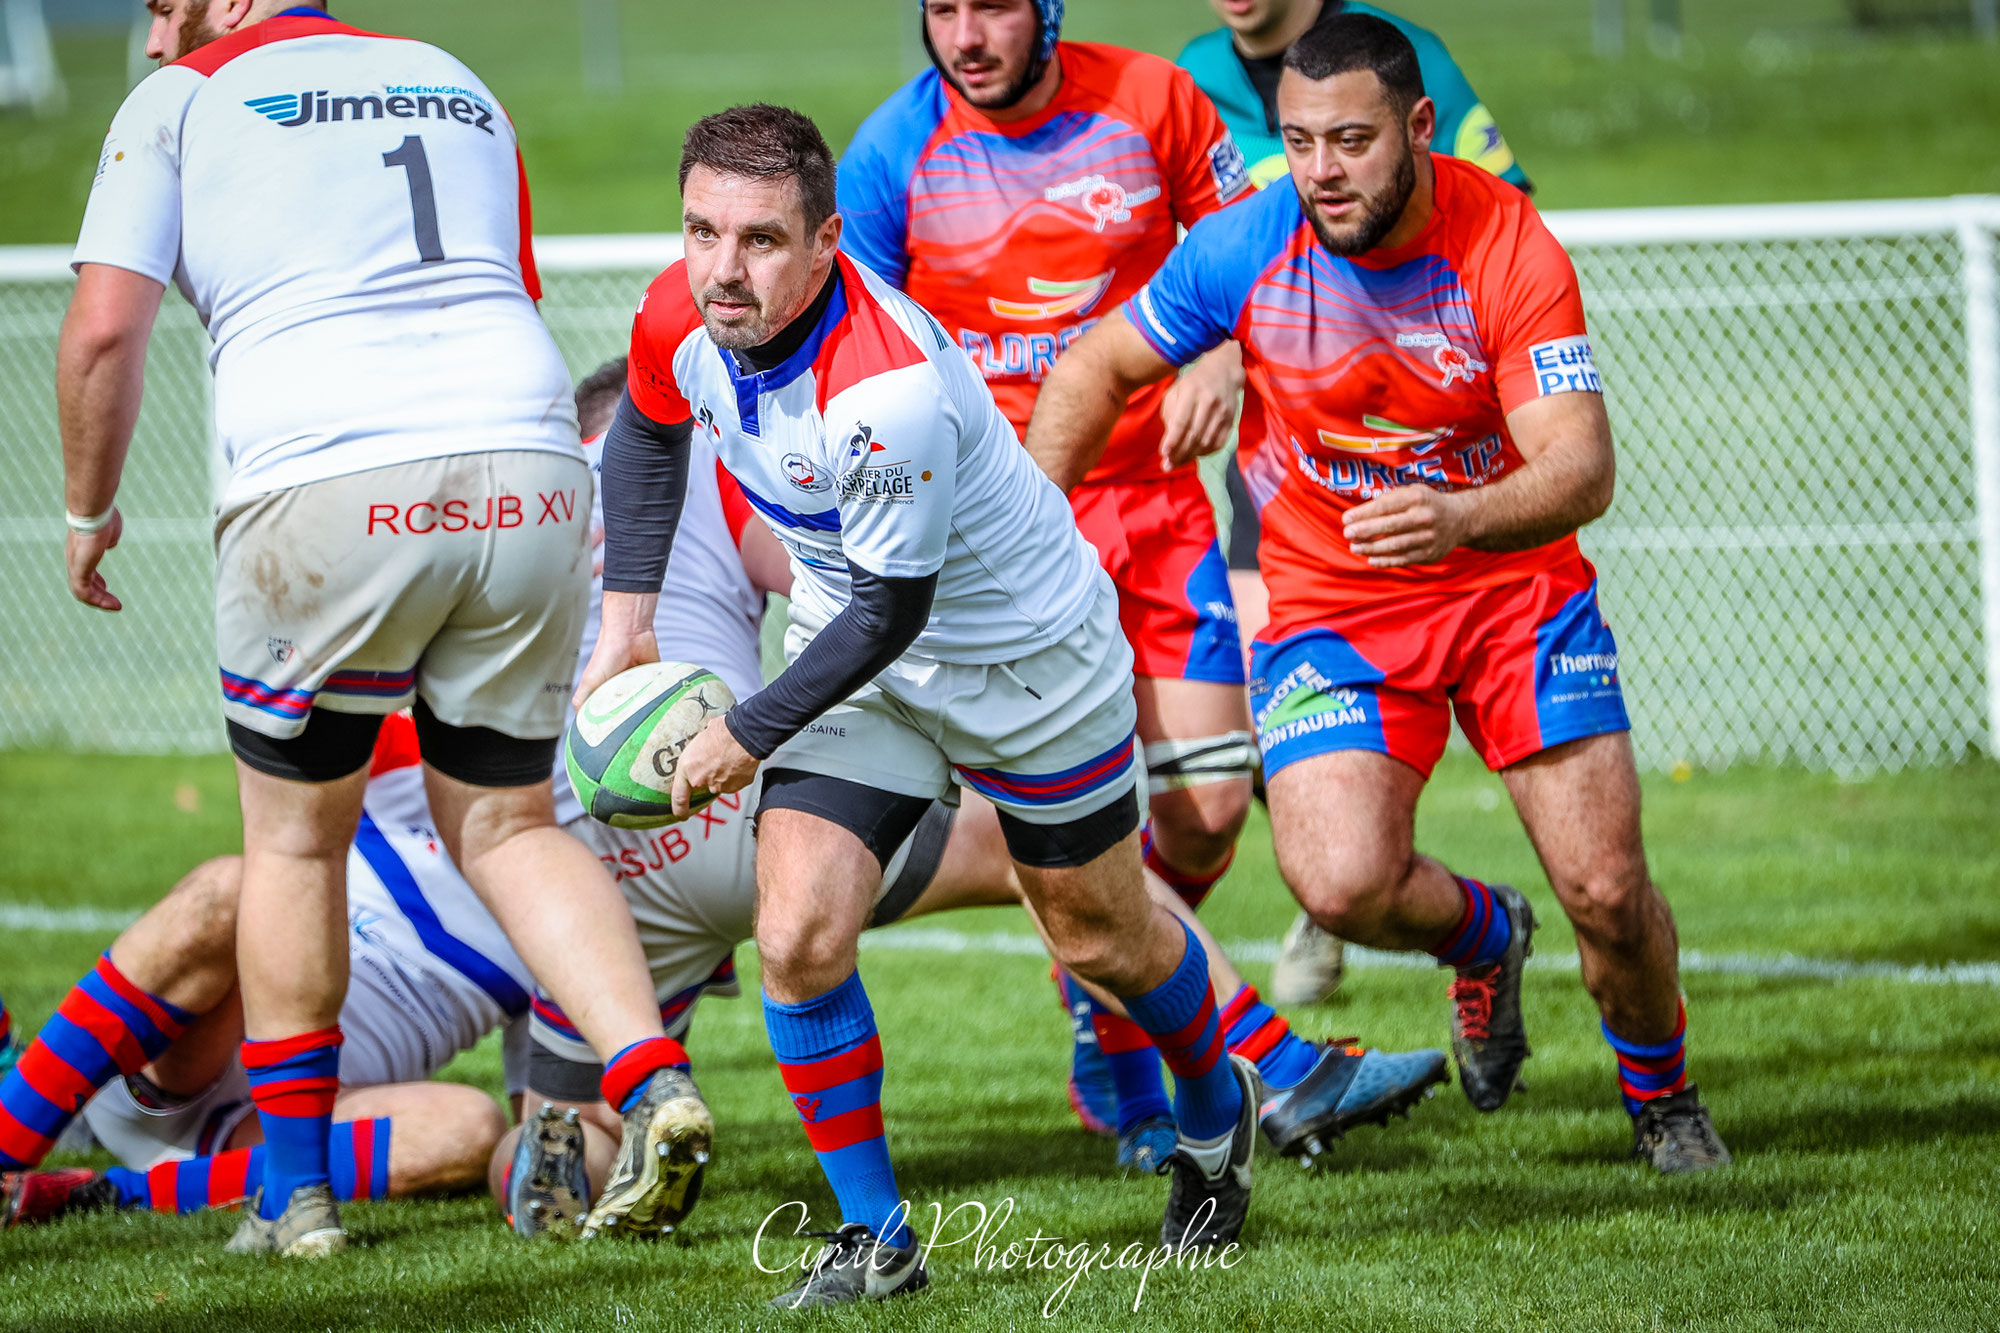 Reportage photo match rugby Saint-Jory Bruguieres XV - Montech